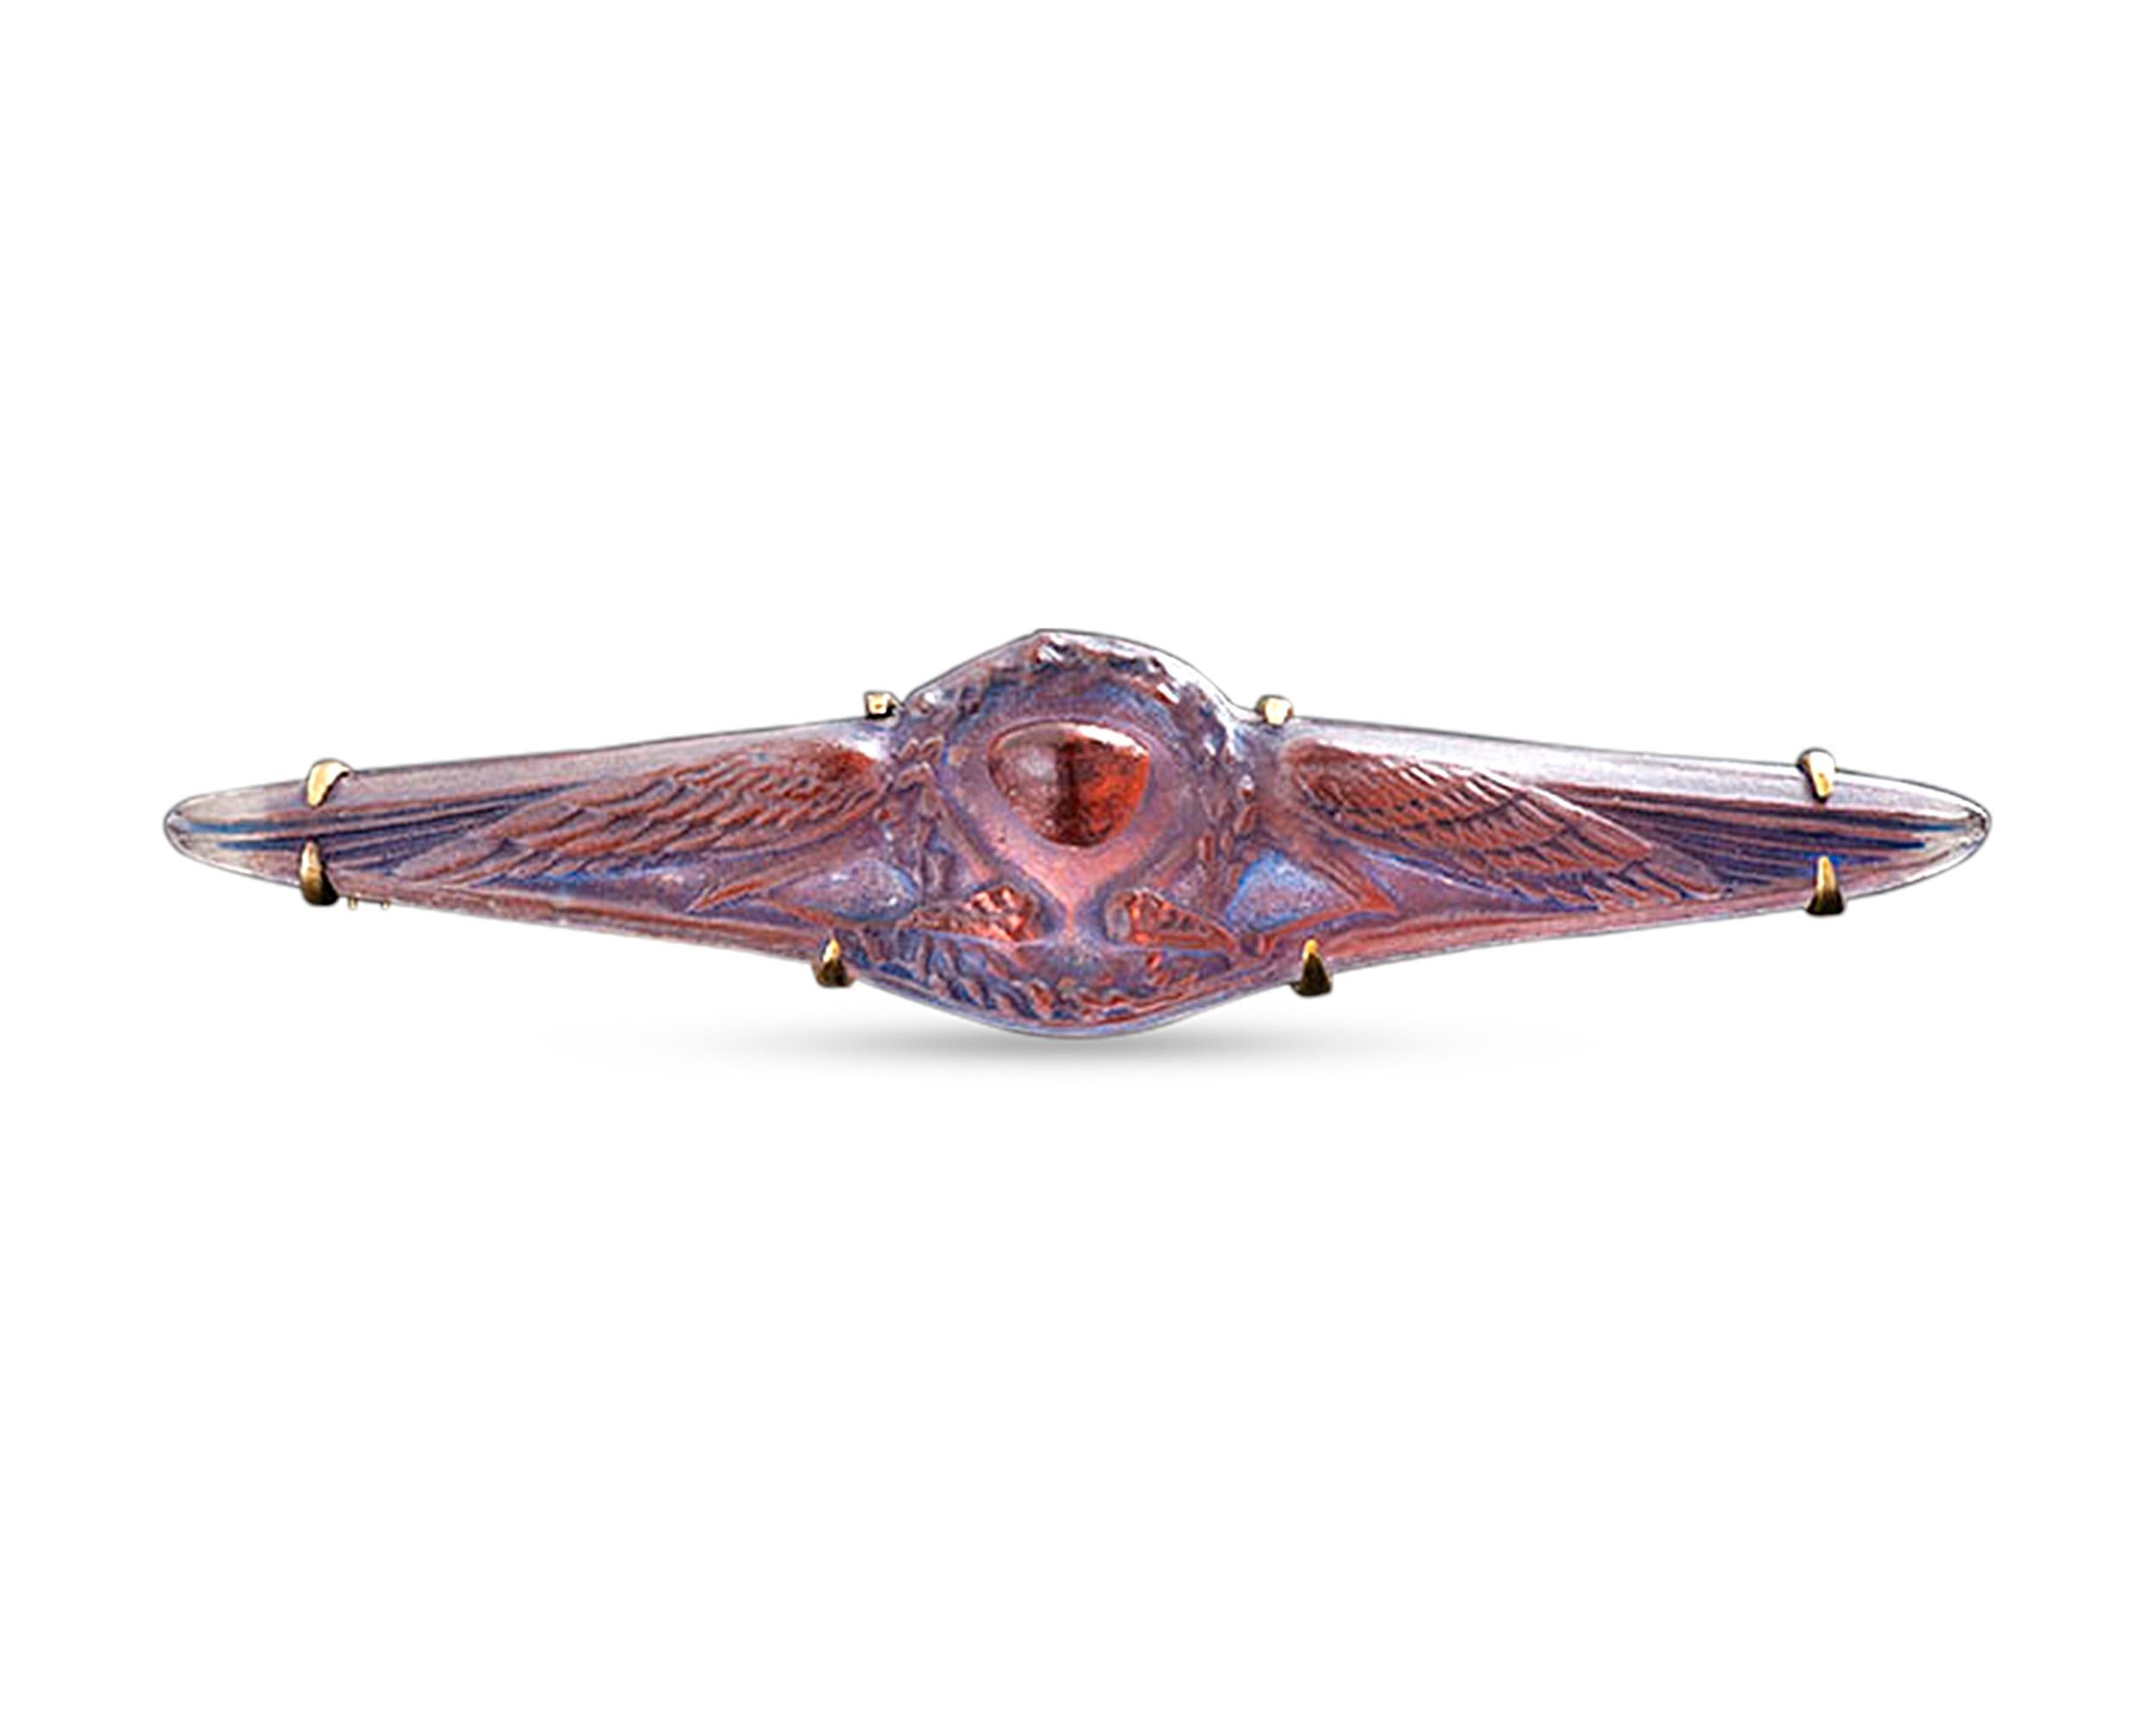 A quintessential jewel of Art Nouveau design, this carved glass brooch by the legendary René Lalique showcases all of the best qualities of this legendary jeweler. A high relief carving of wings surrounding the central pendant reveals the iridescent